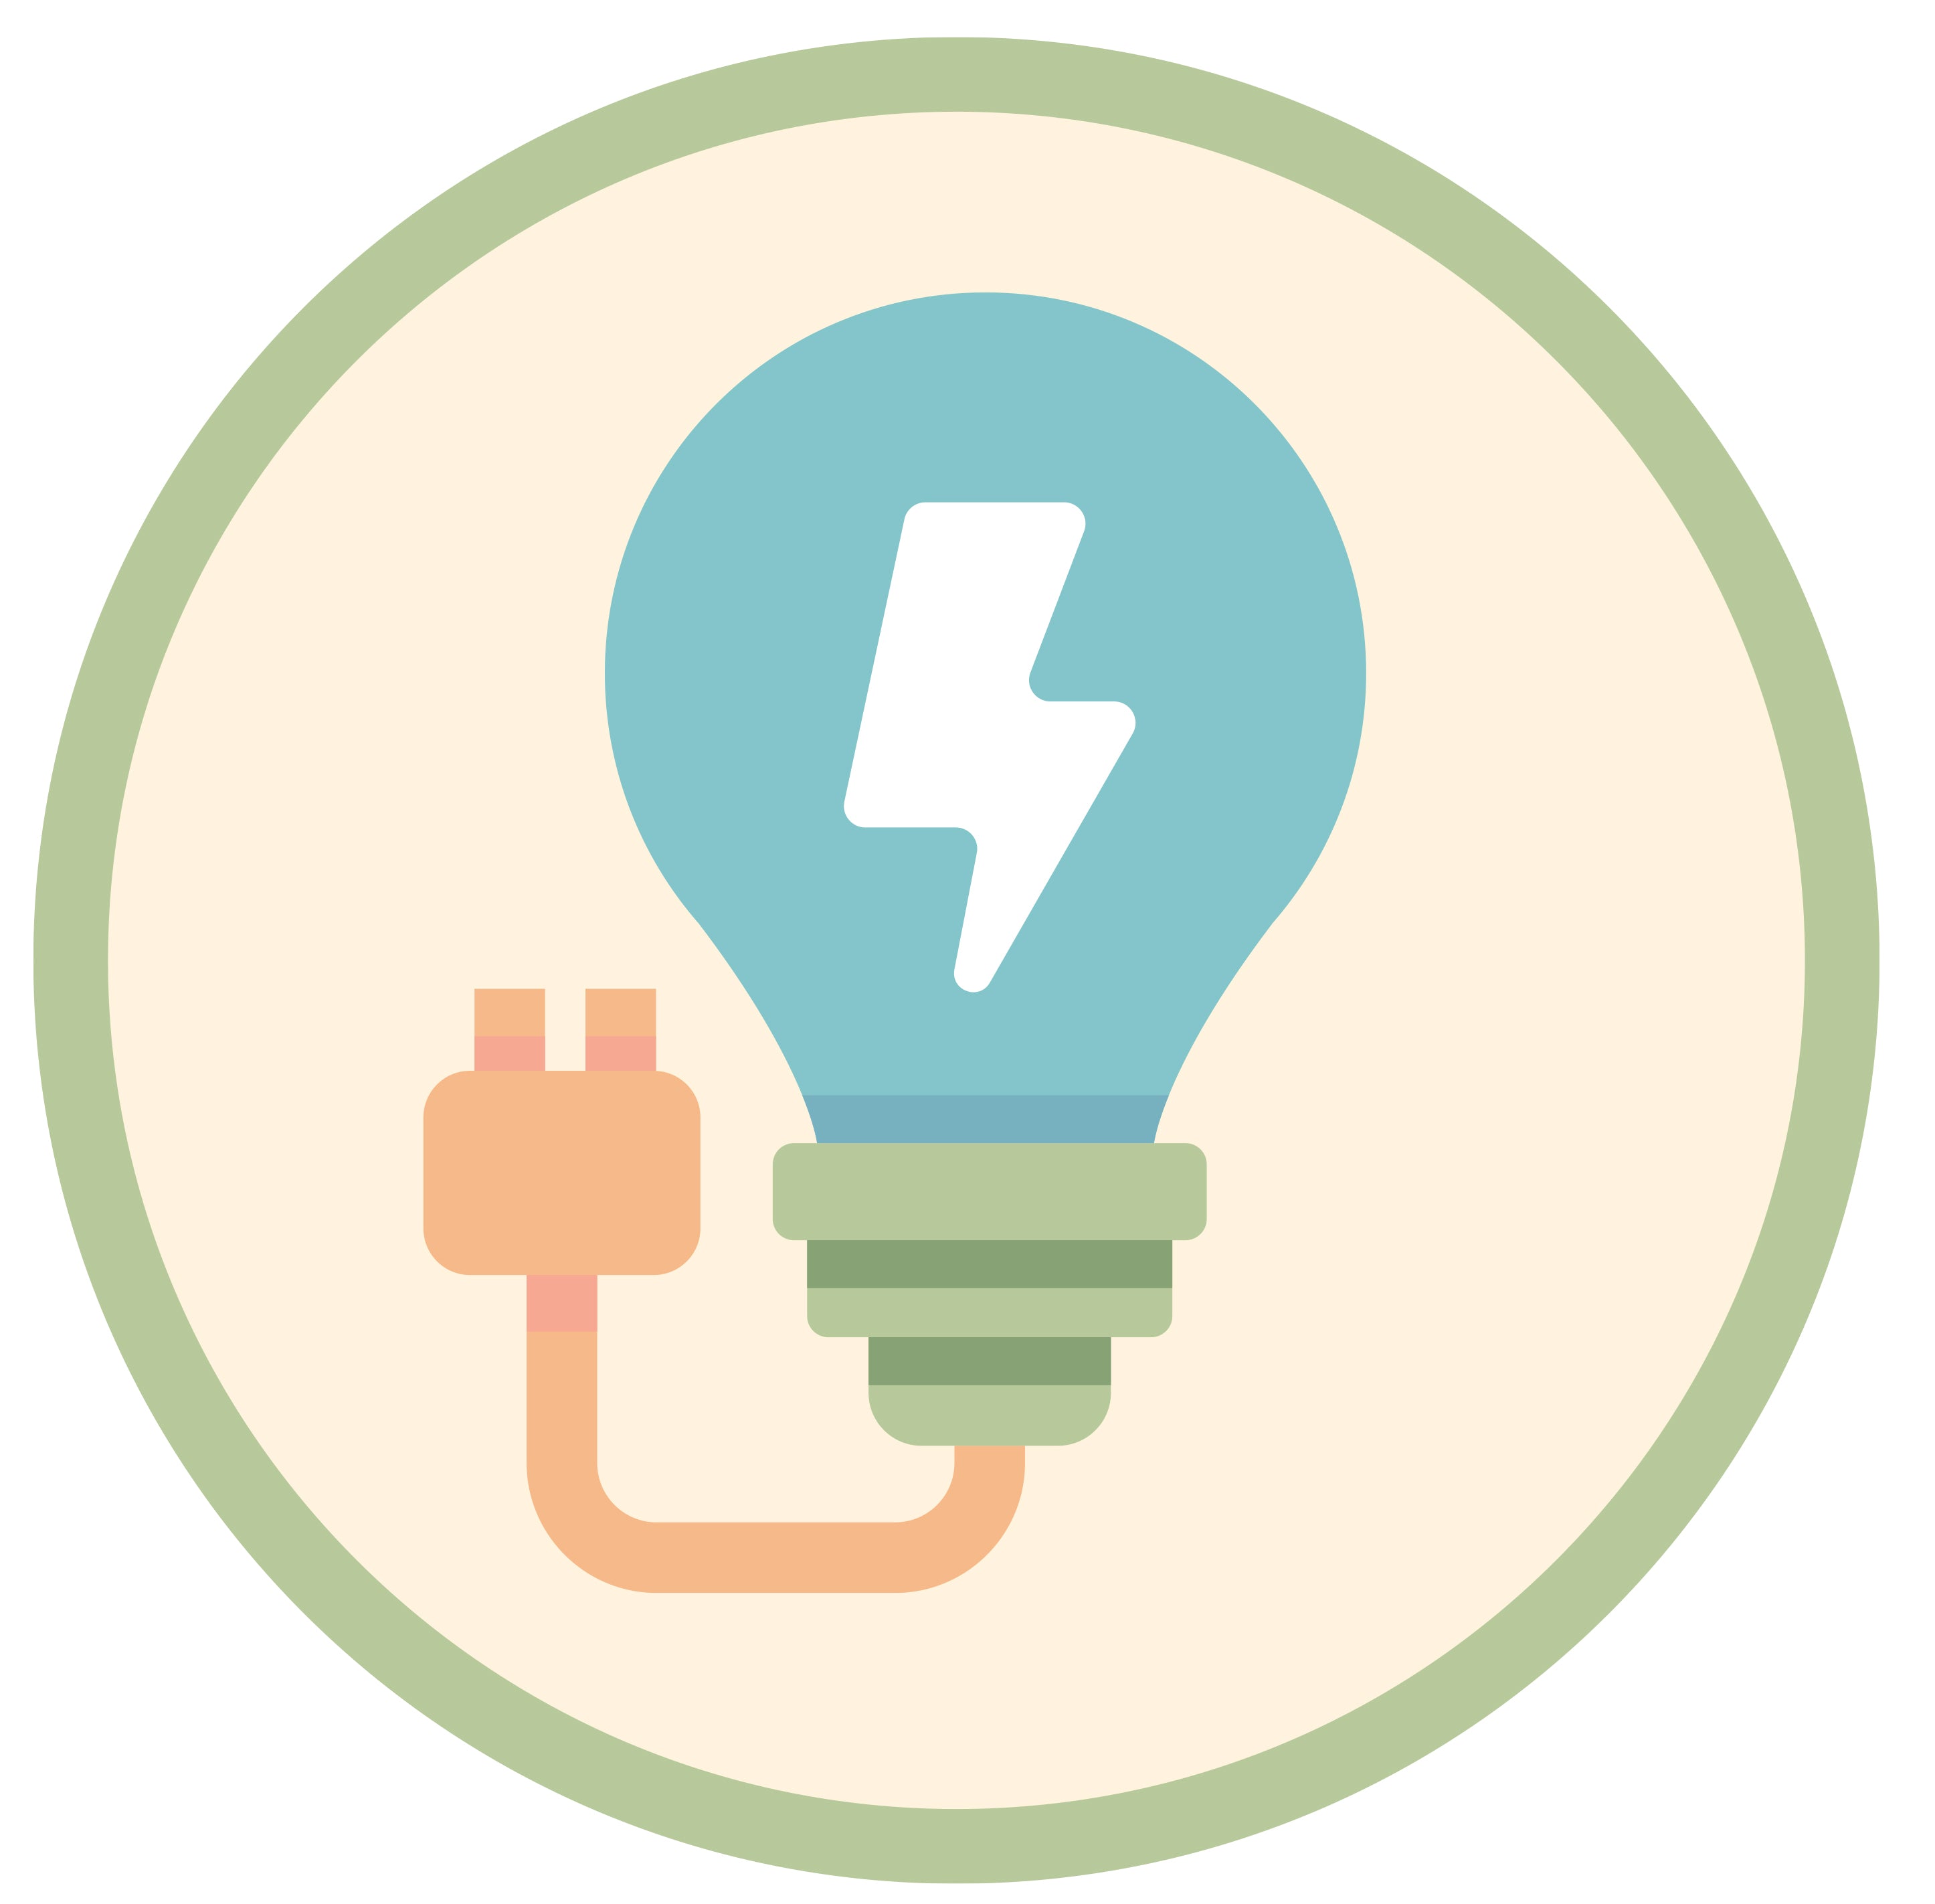 Turn off lights and Unplug - How To Live Sustainable - Eco Living and Sustainability Checklist